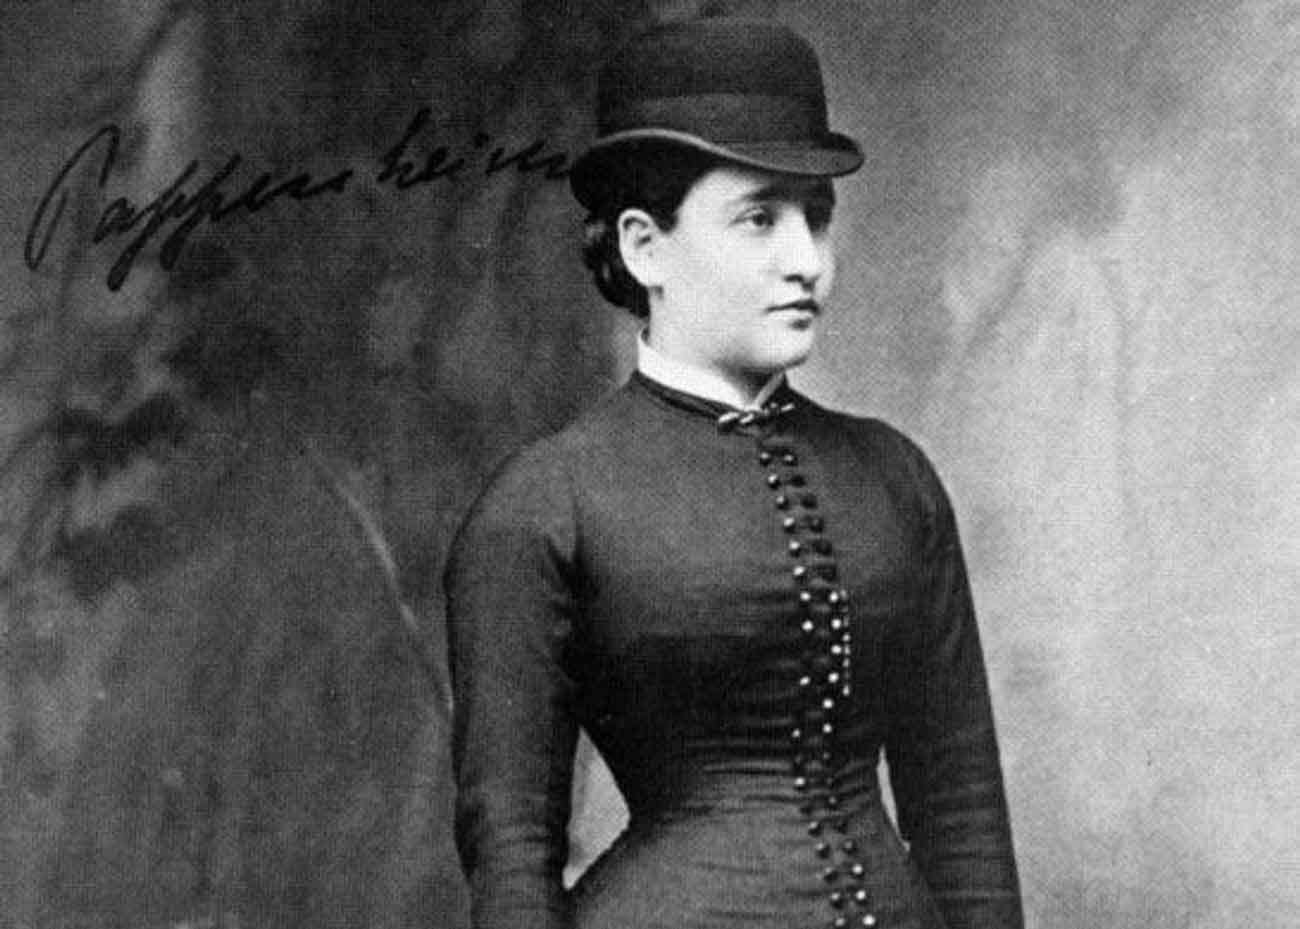 Daguerreotype photo of a white woman with dark hair pulled back wearing a bowler hat and a tight-fitting dress with buttons down the front.